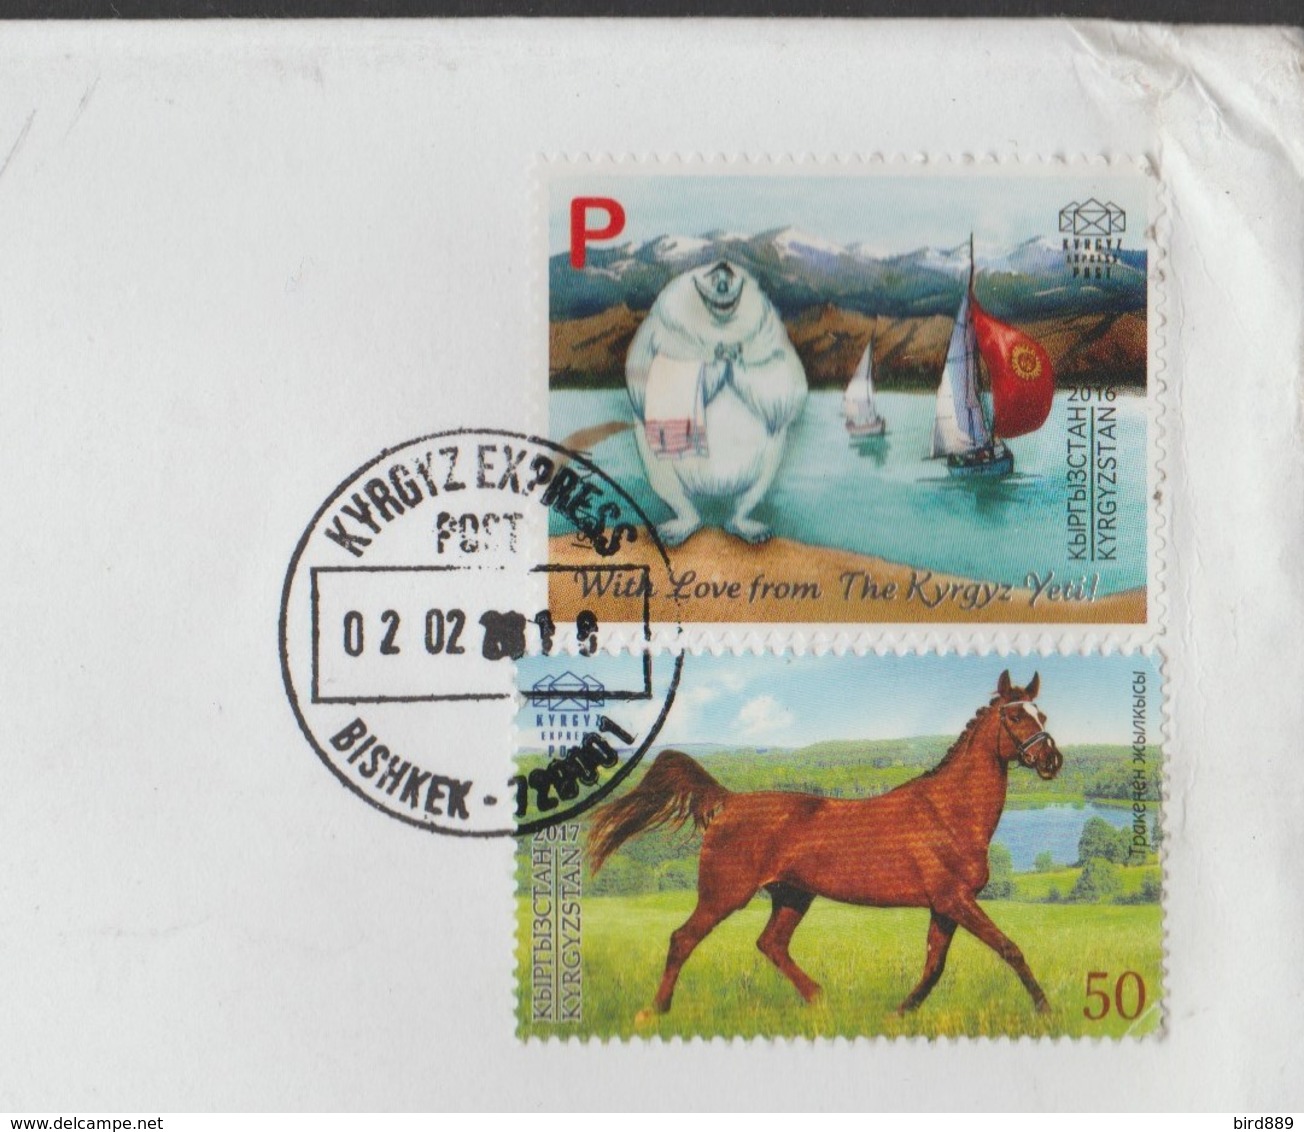 Kyrgyzstan Express Post Kyrgyz Yeti And Horse  2 Stamps Used - Kyrgyzstan